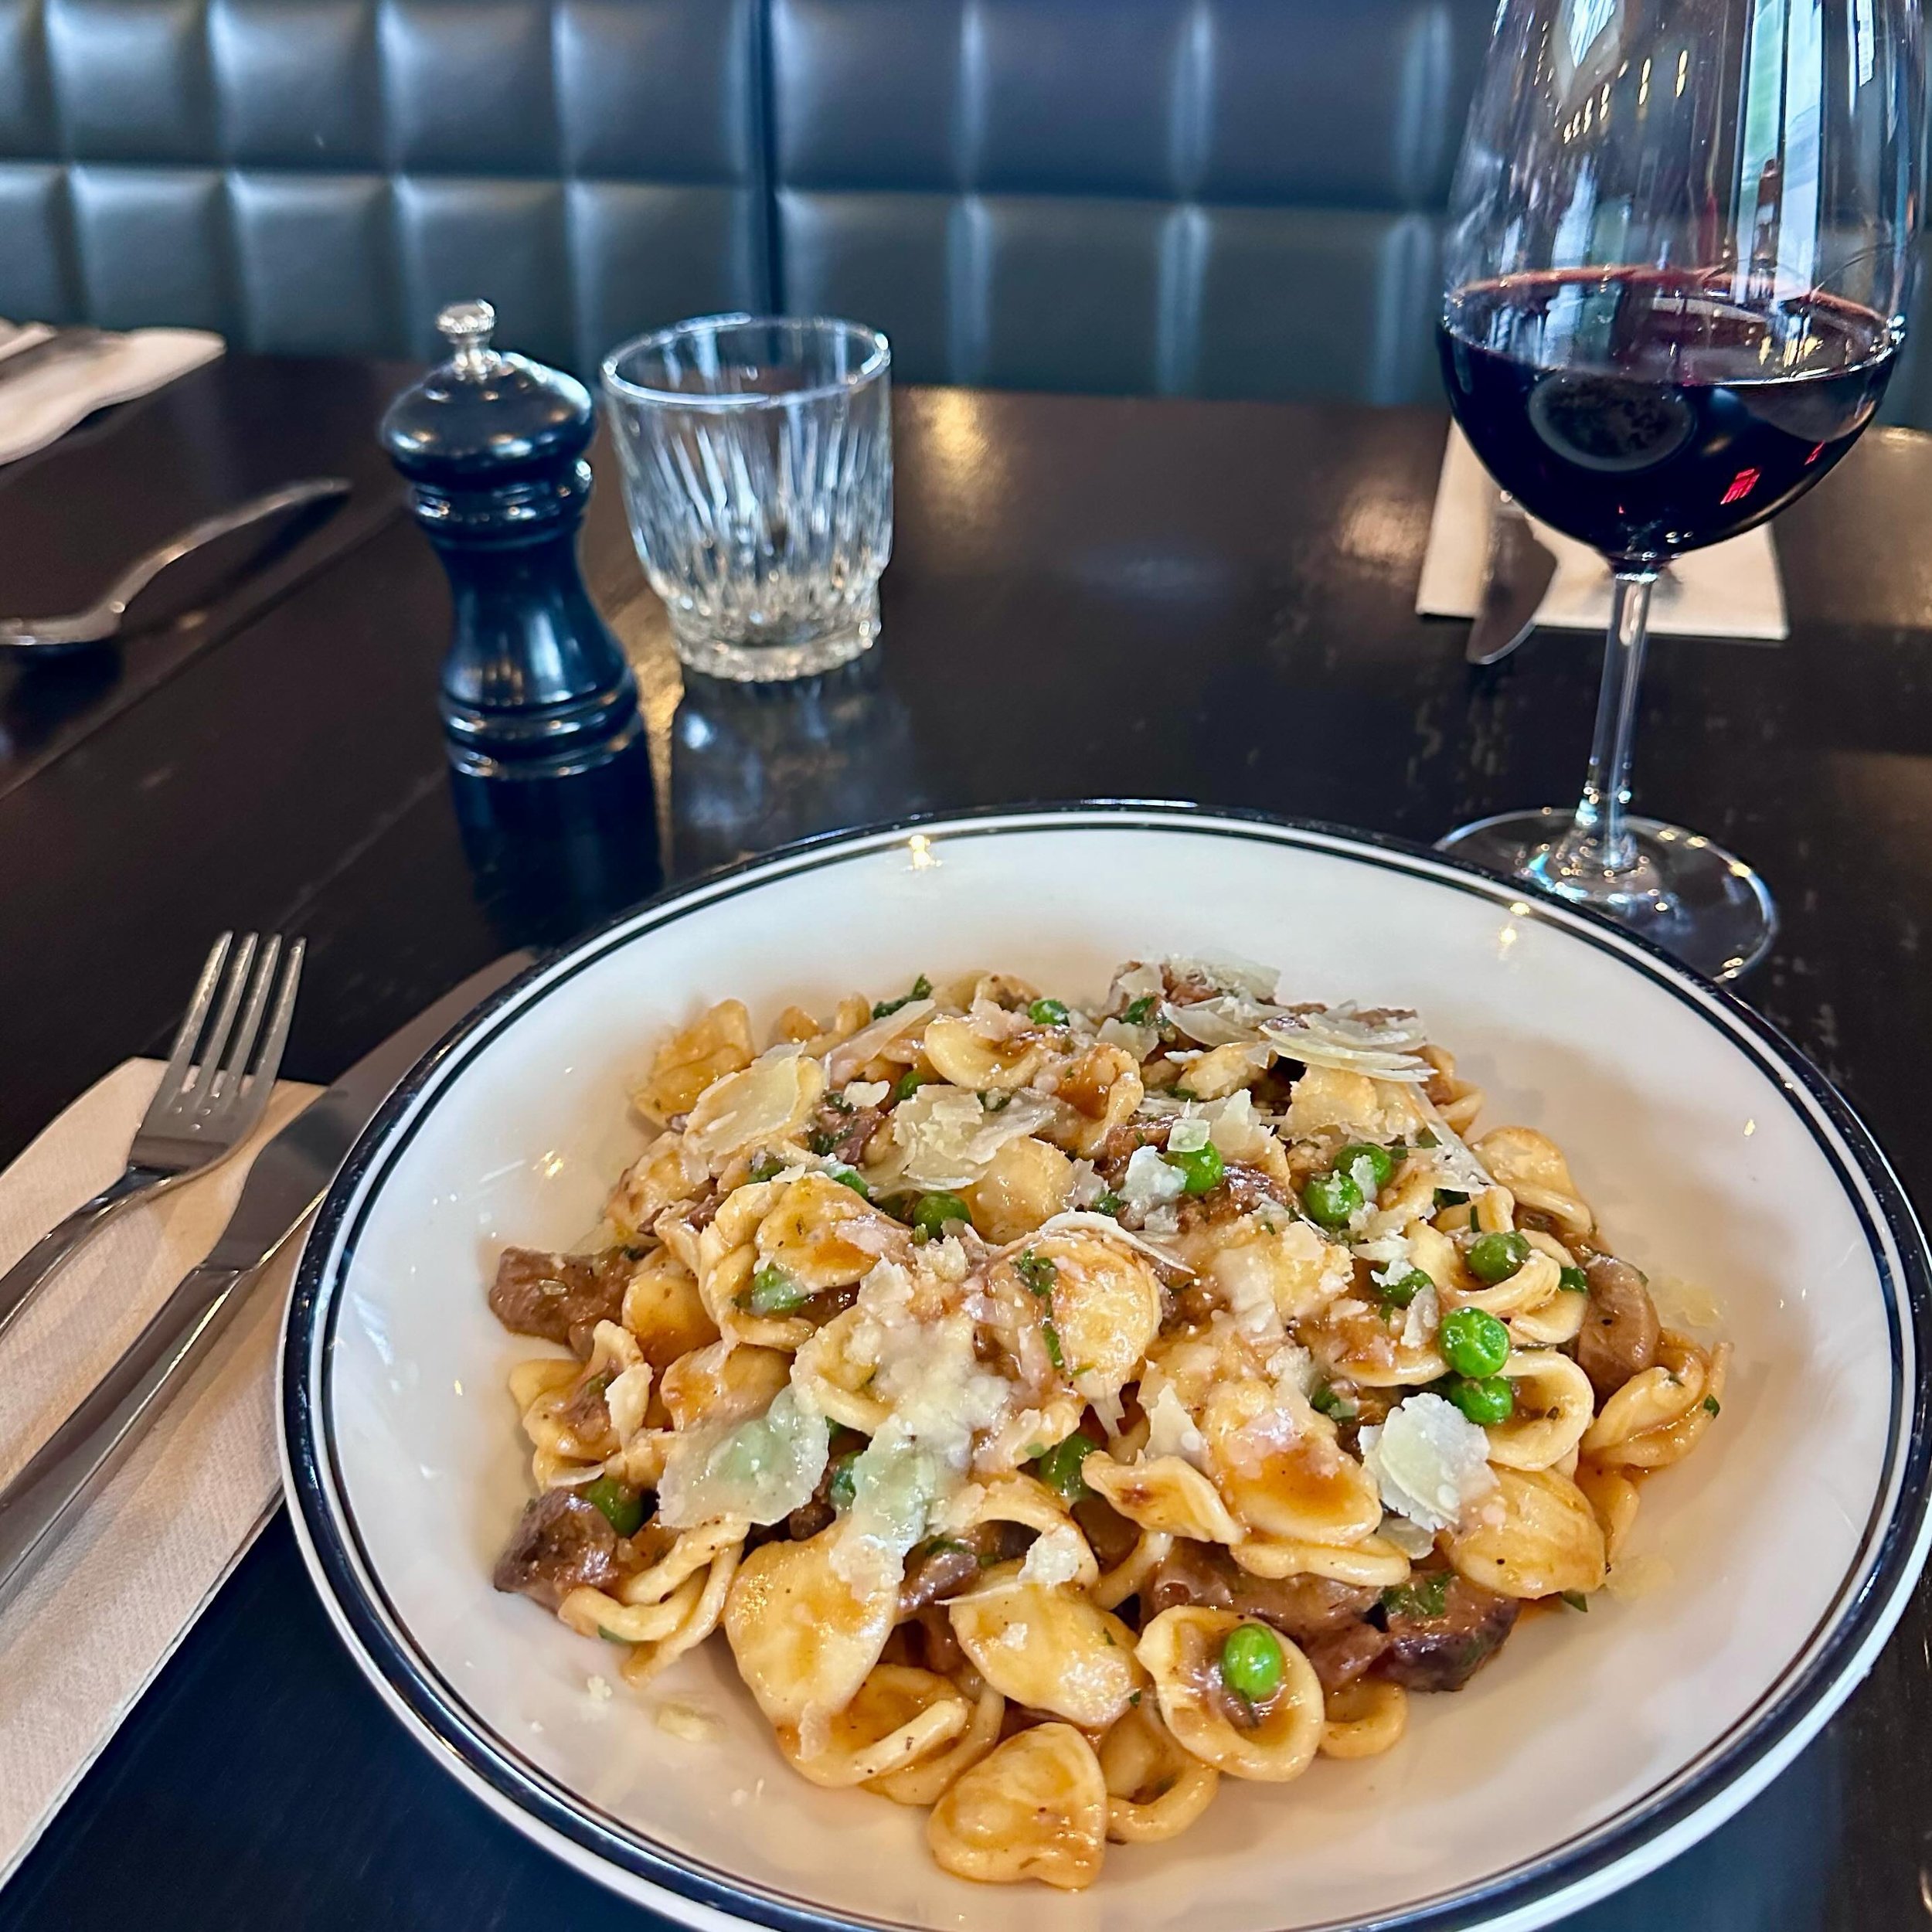 Cosying up to lamb ragu and a glass of red 😊 

Braised lamb shoulder ragu, orecchiette, peas, parsley, parmesan - now available on the specials menu.

#lambragu #todaysspecial #lunch #dinner #pubfood #noordinarypubfood